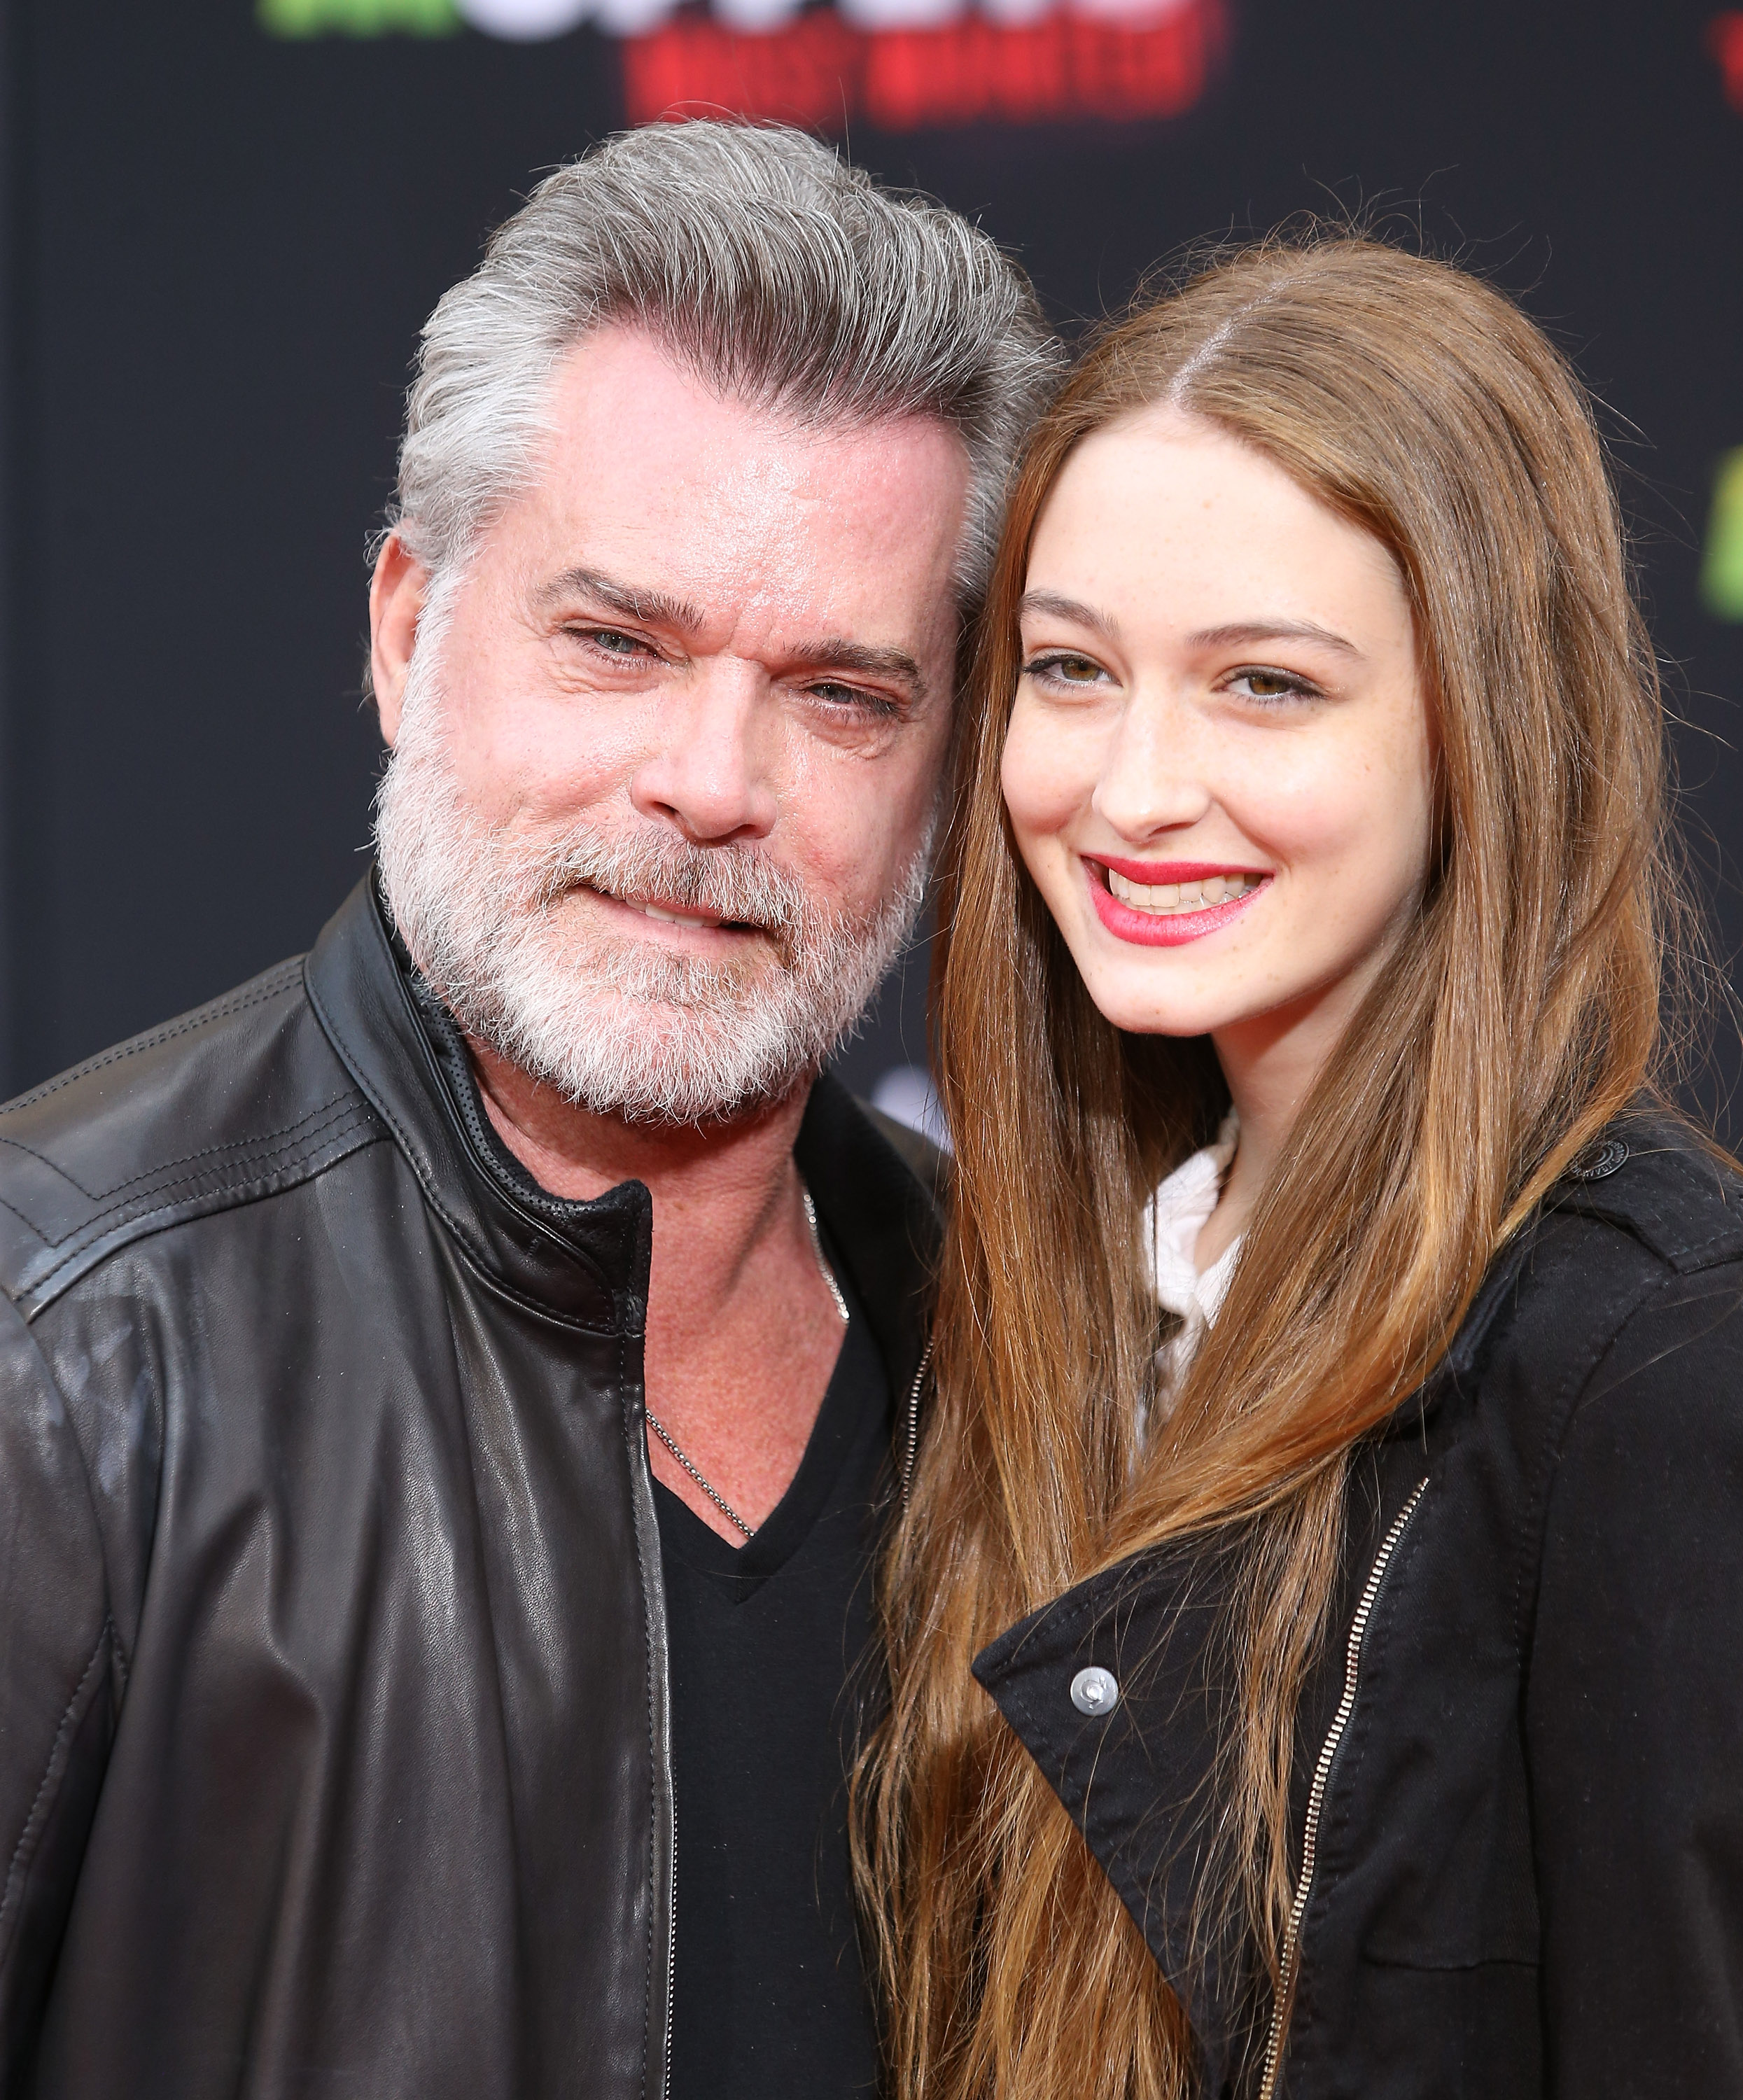 Ray Liotta (L) and daughter Karsen Liotta arrive at the Los Angeles premiere of "Muppets Most Wanted" held at the El Capitan Theatre, on March 11, 2014, in Hollywood, California. | Source: Getty Images